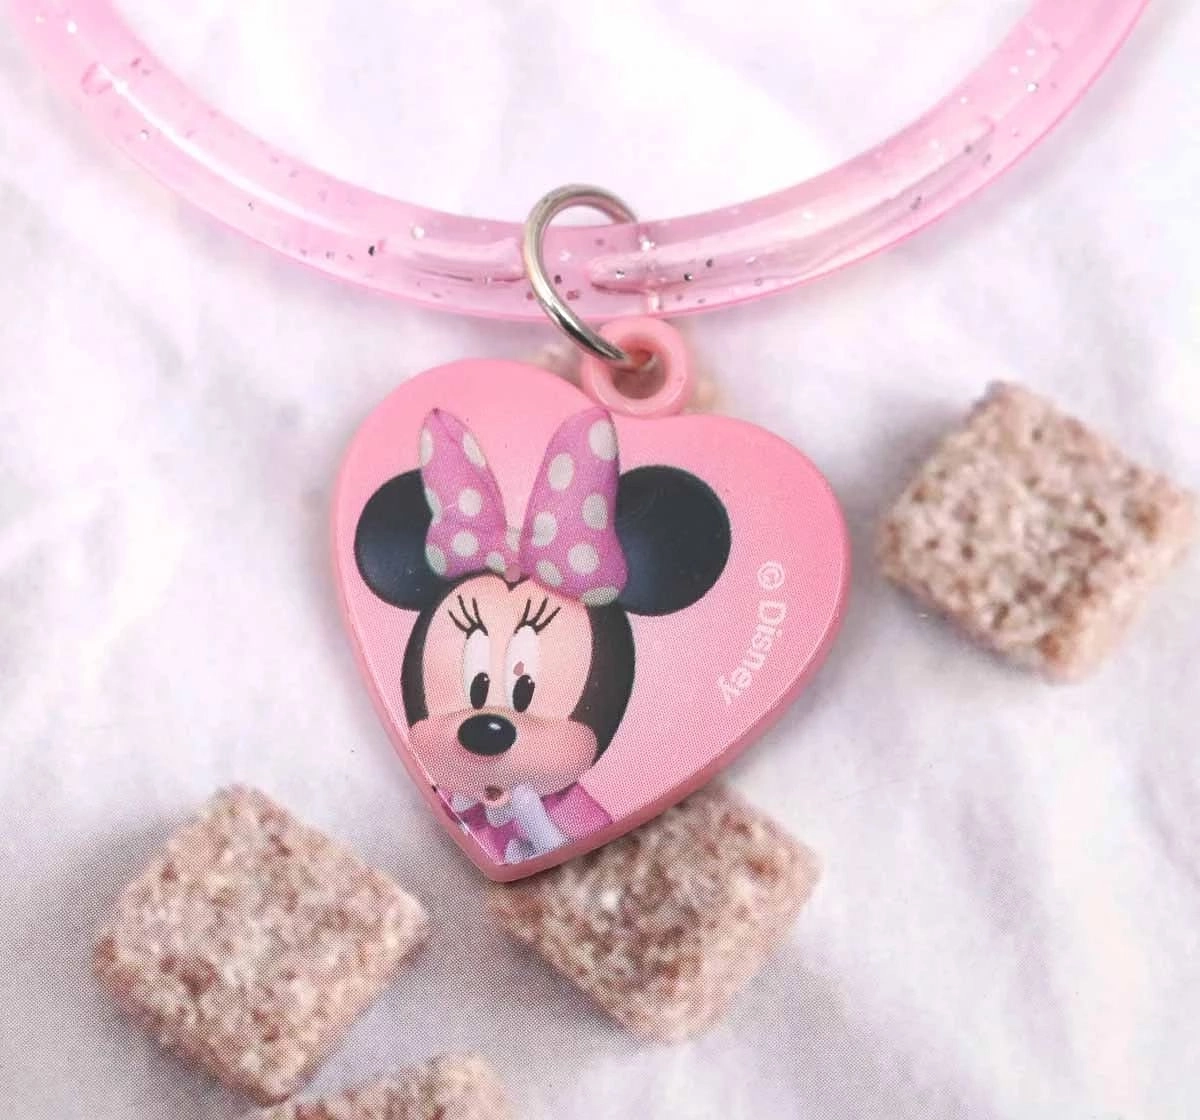 Rebecca Hook Unveils New Springtime Minnie Mouse Necklace- Coming Soon!